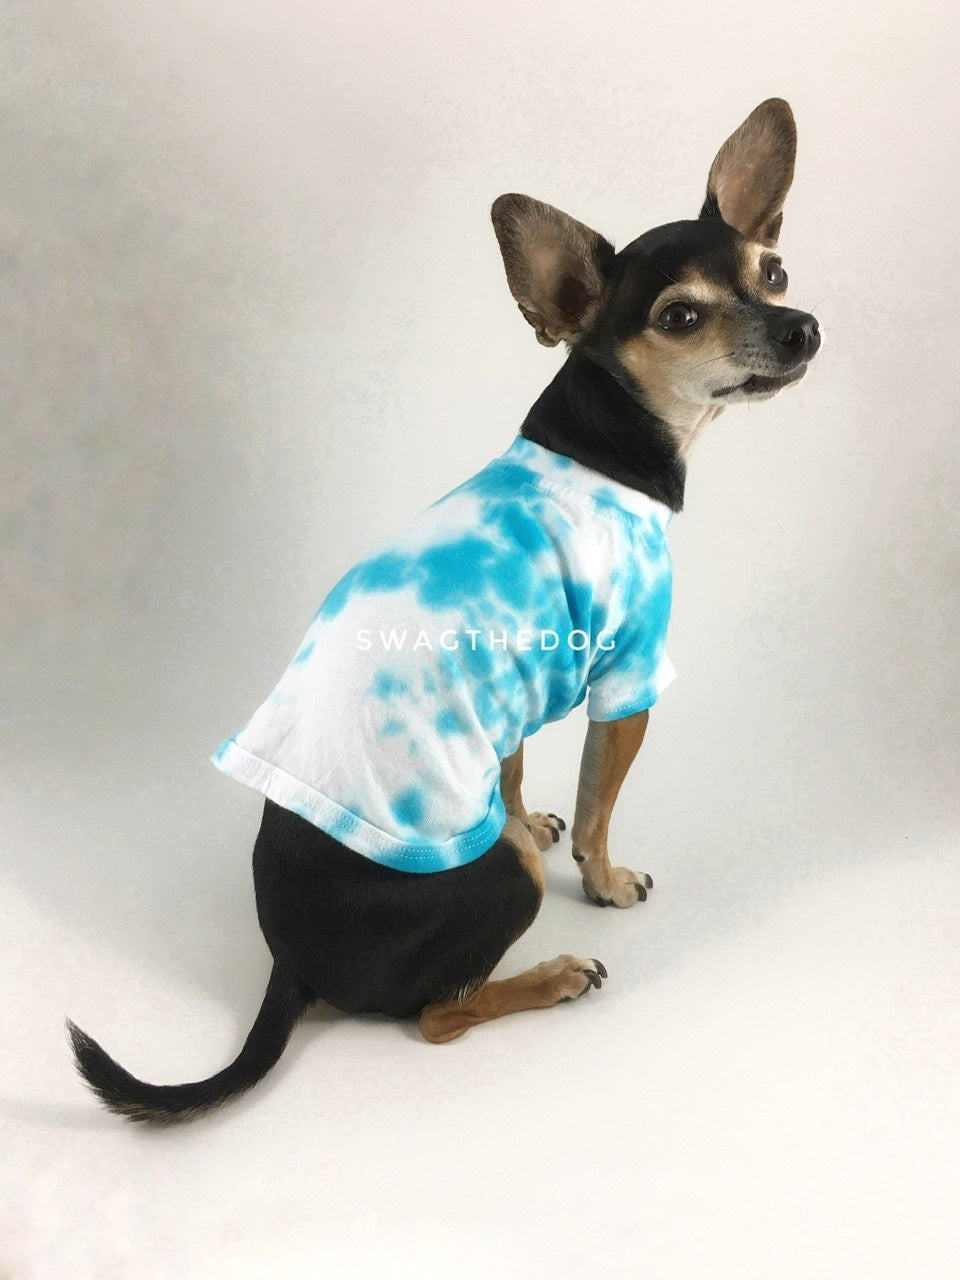 Swagadelic Sky Blue Tie Dye Tee - Cute Chihuahua named Hugo in sitting position with his back towards the camera and looking back, wearing the hand tie-dyed tee with Sky Blue